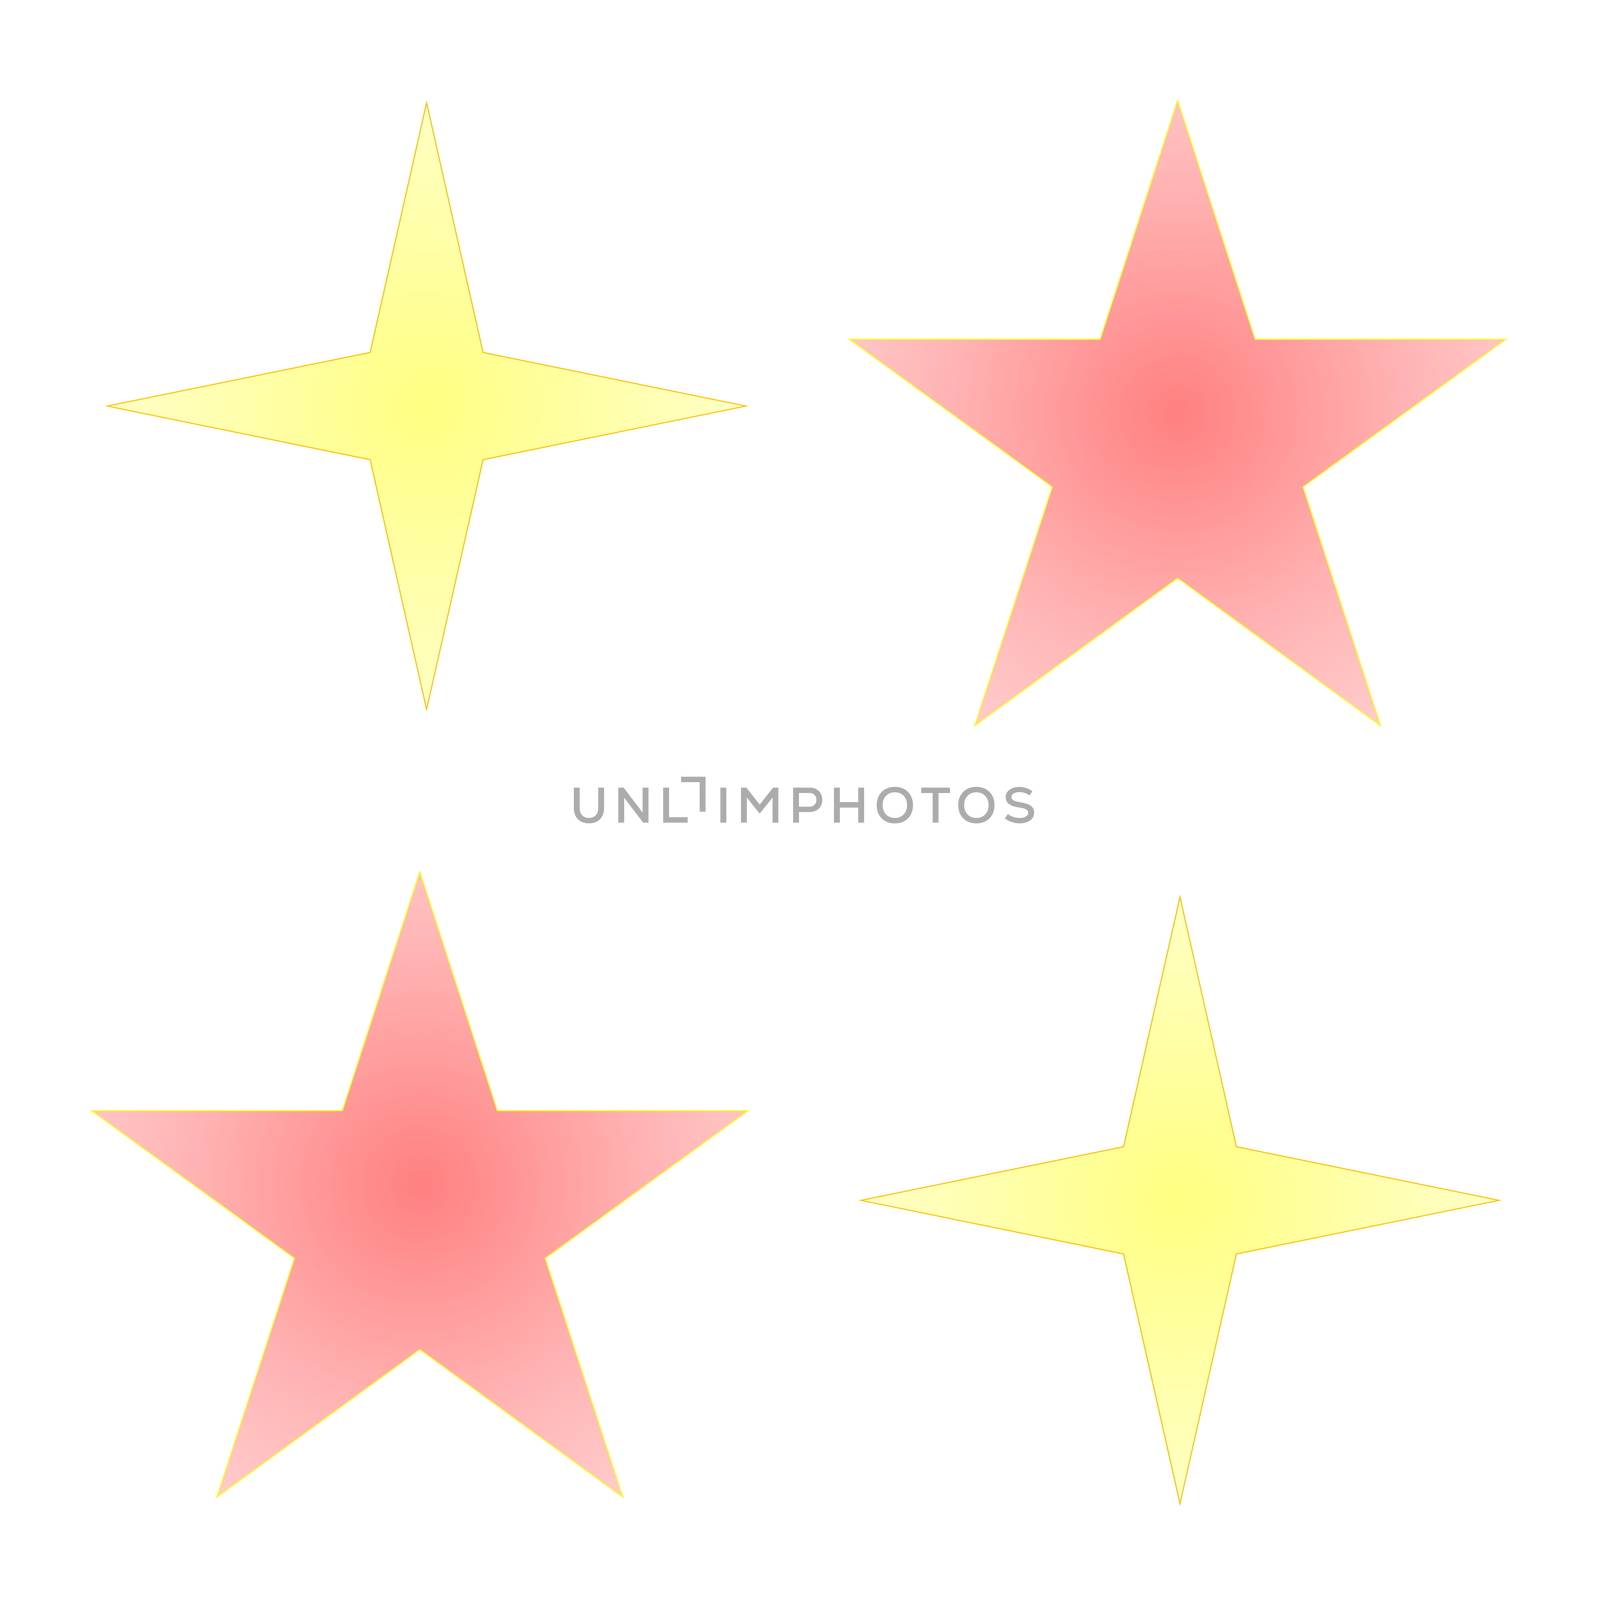 stars yellow and red by mariephotos